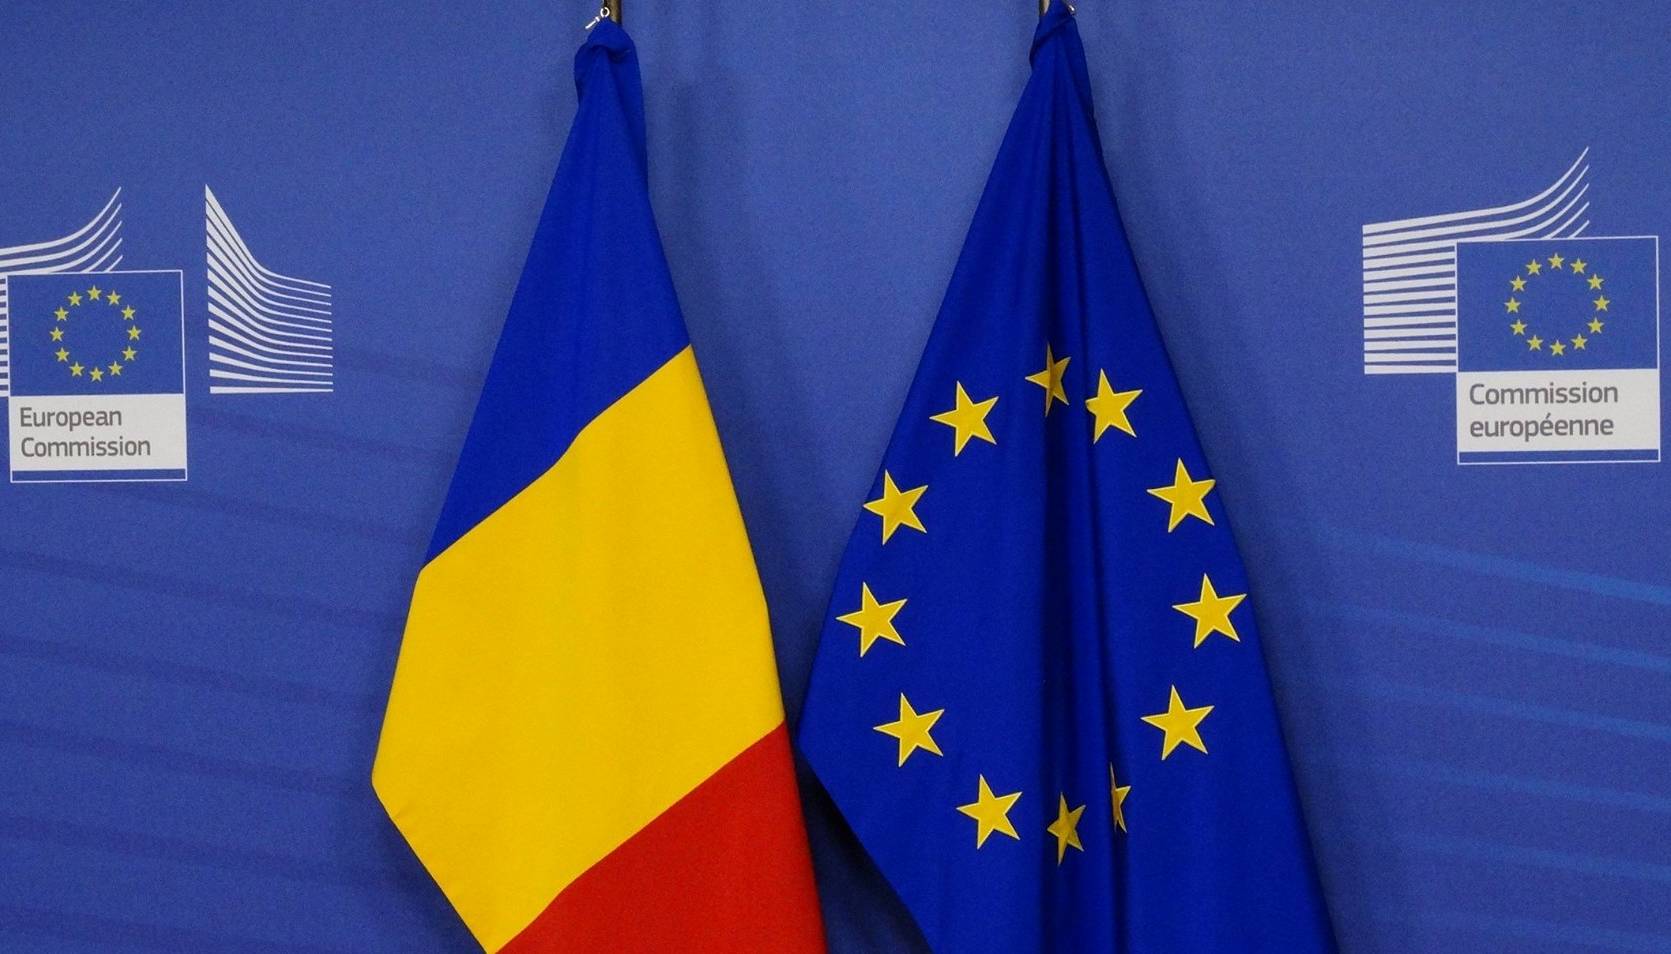 The European Commission Grants New Financial Aid to the Republic of Moldova